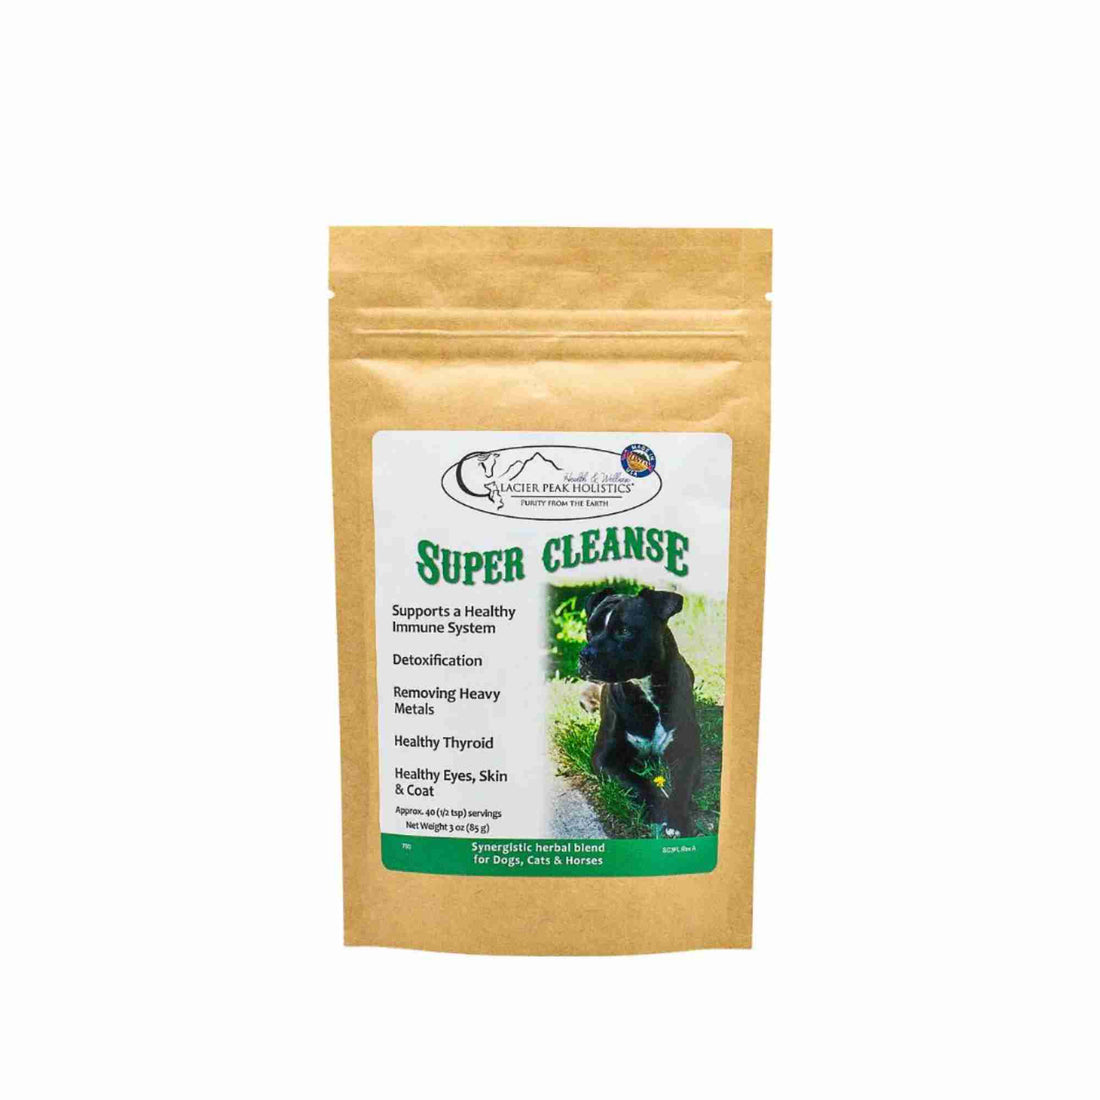 Glacier Peaks Holistics - Super Cleanse - Herbal Blend for cats, dogs, and horses, supporting detoxification, healthy thyroid and healthy eyes front of pouch